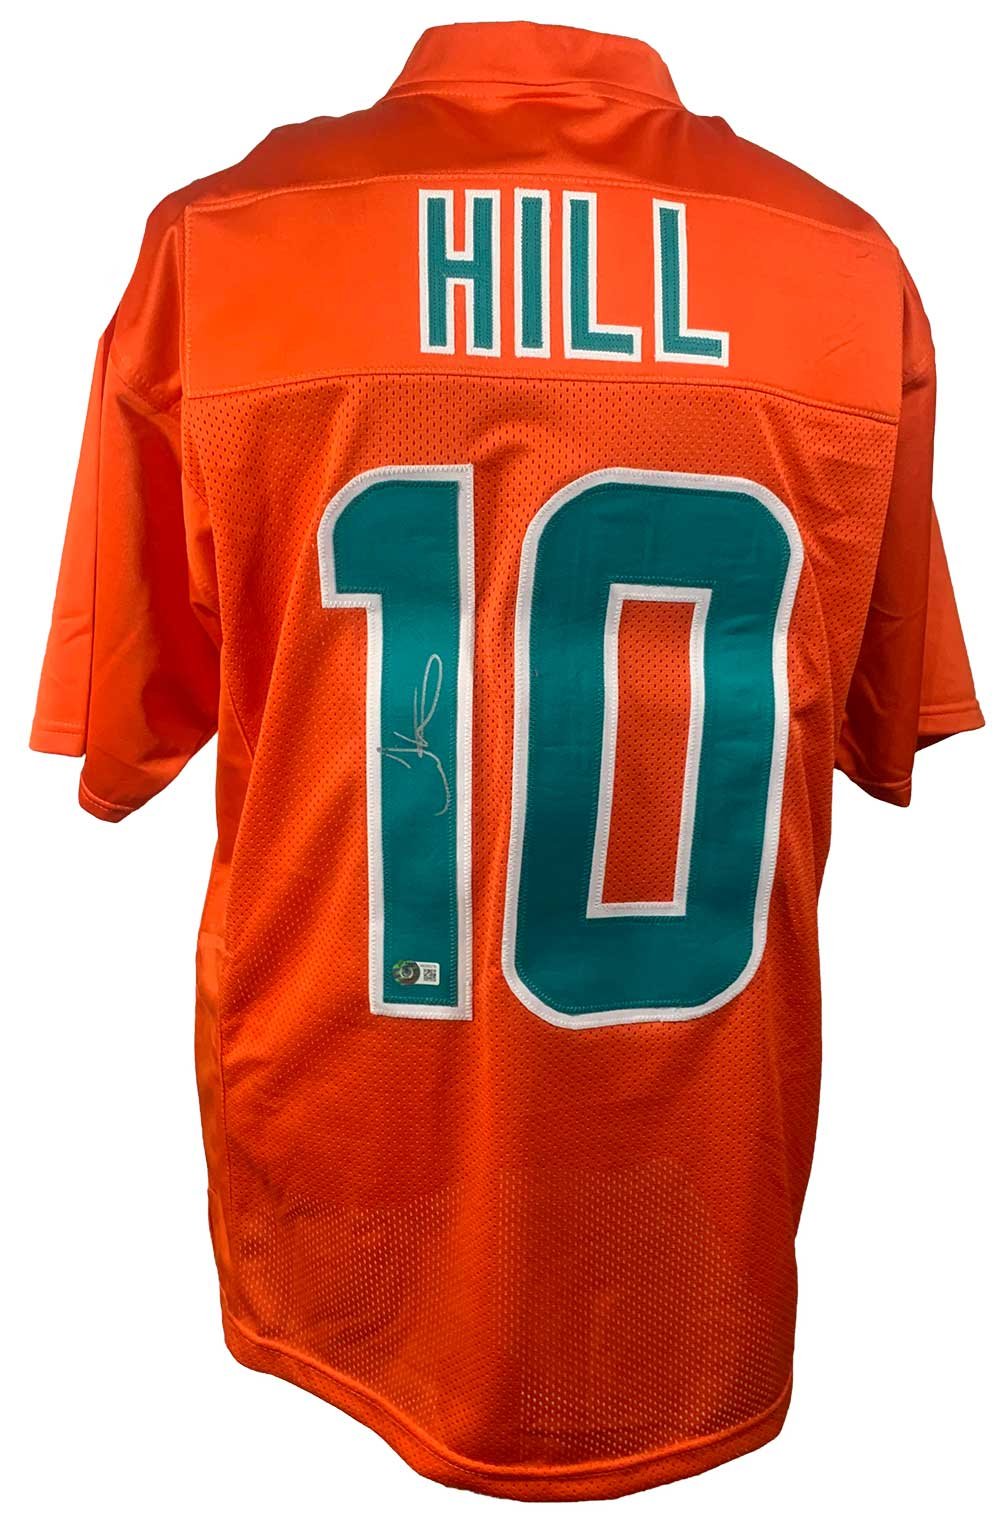 Miami Dolphins Tyreek Hill Autographed Pro Style Orange Jersey 